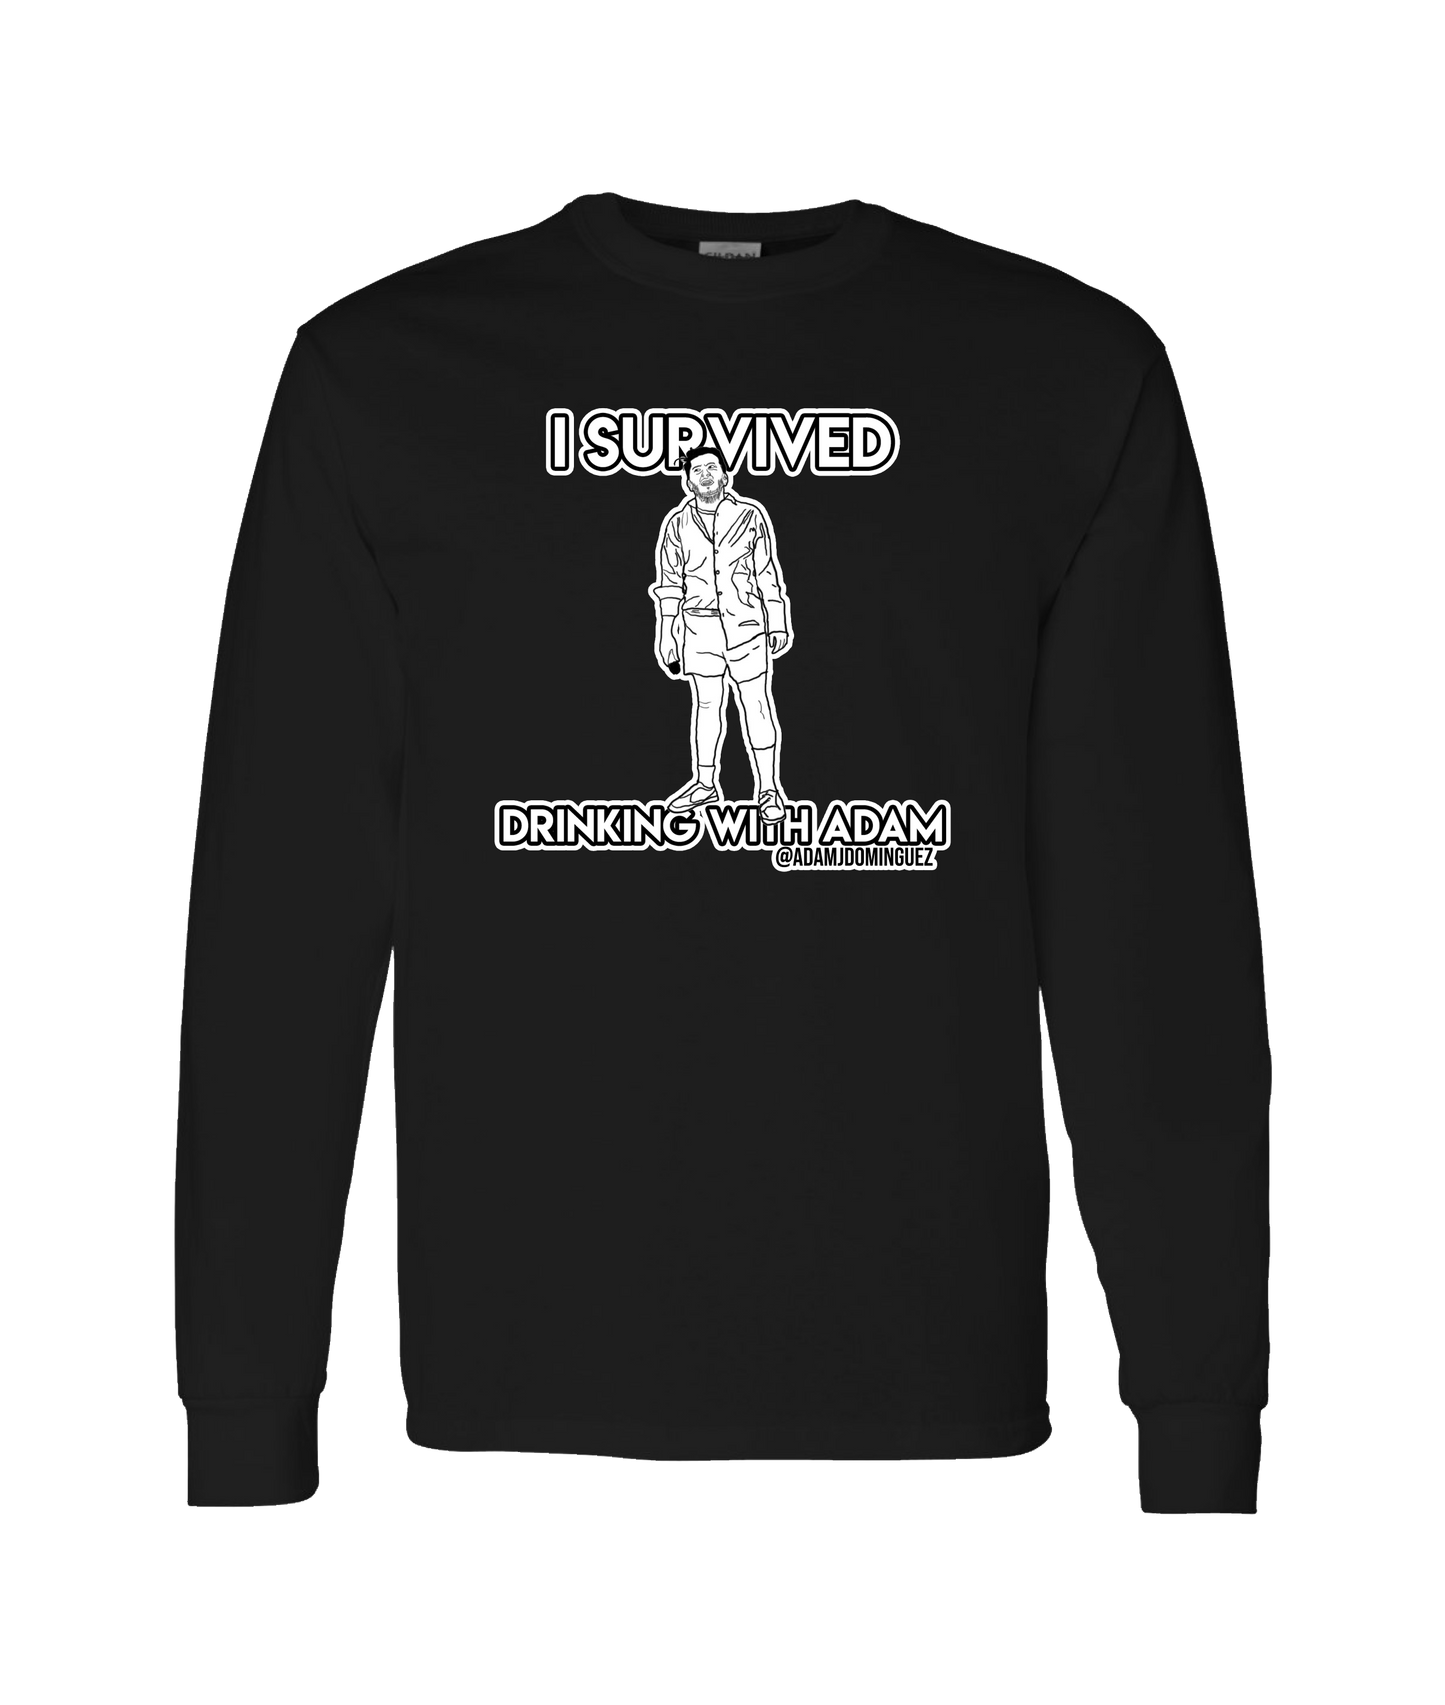 Adam Dominguez - I Survived Drinking With Adam - Black Long Sleeve T